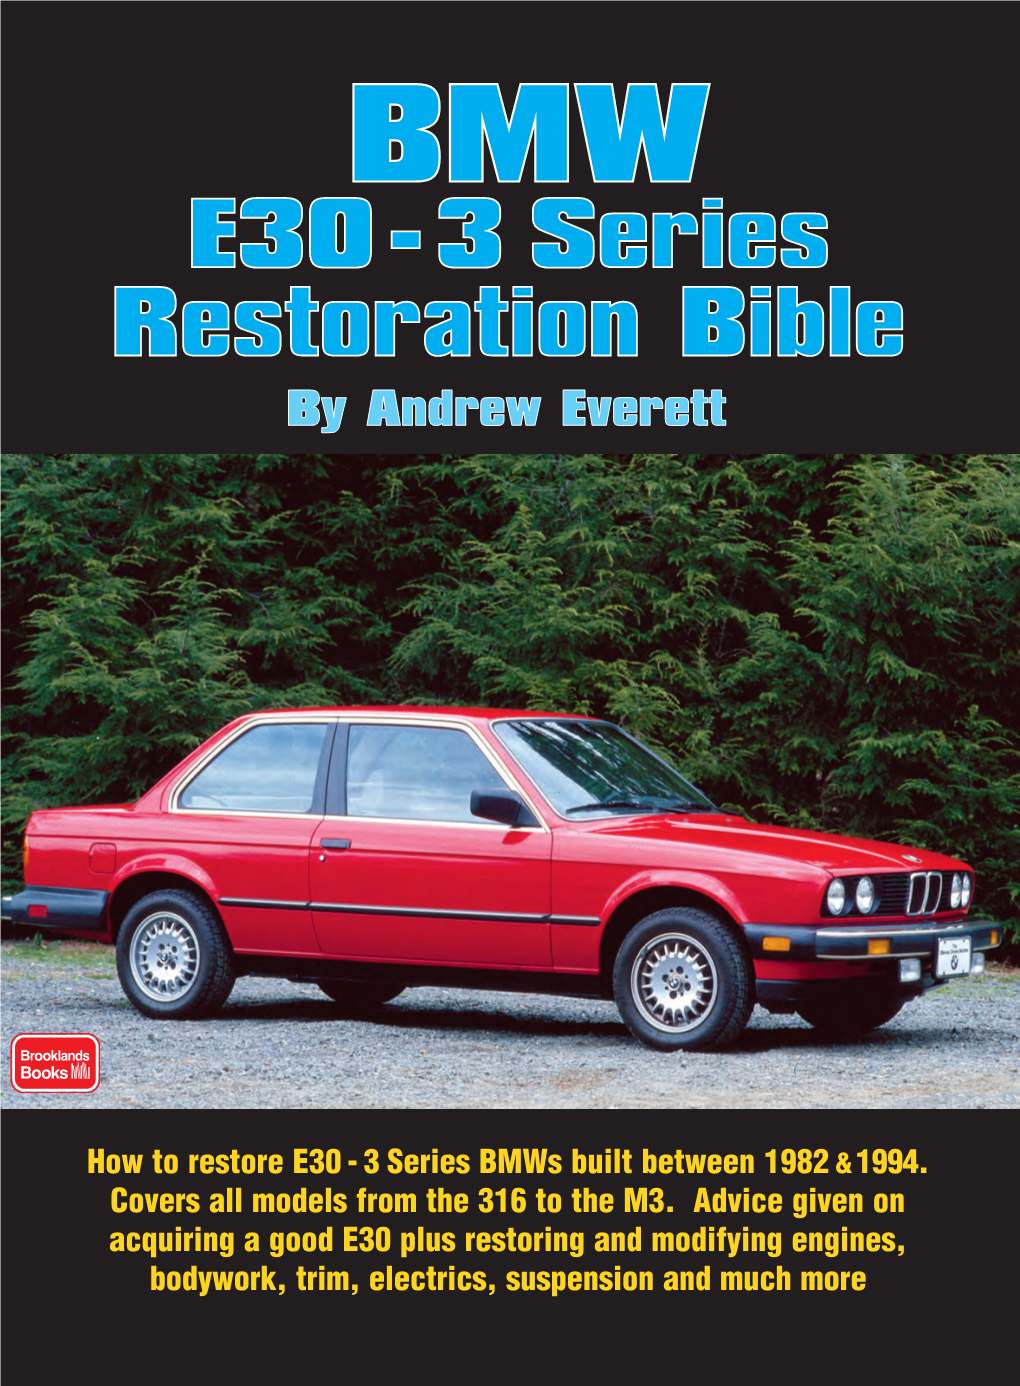 How to Restore E30 - 3 Series Bmws Built Between 1982 &1994